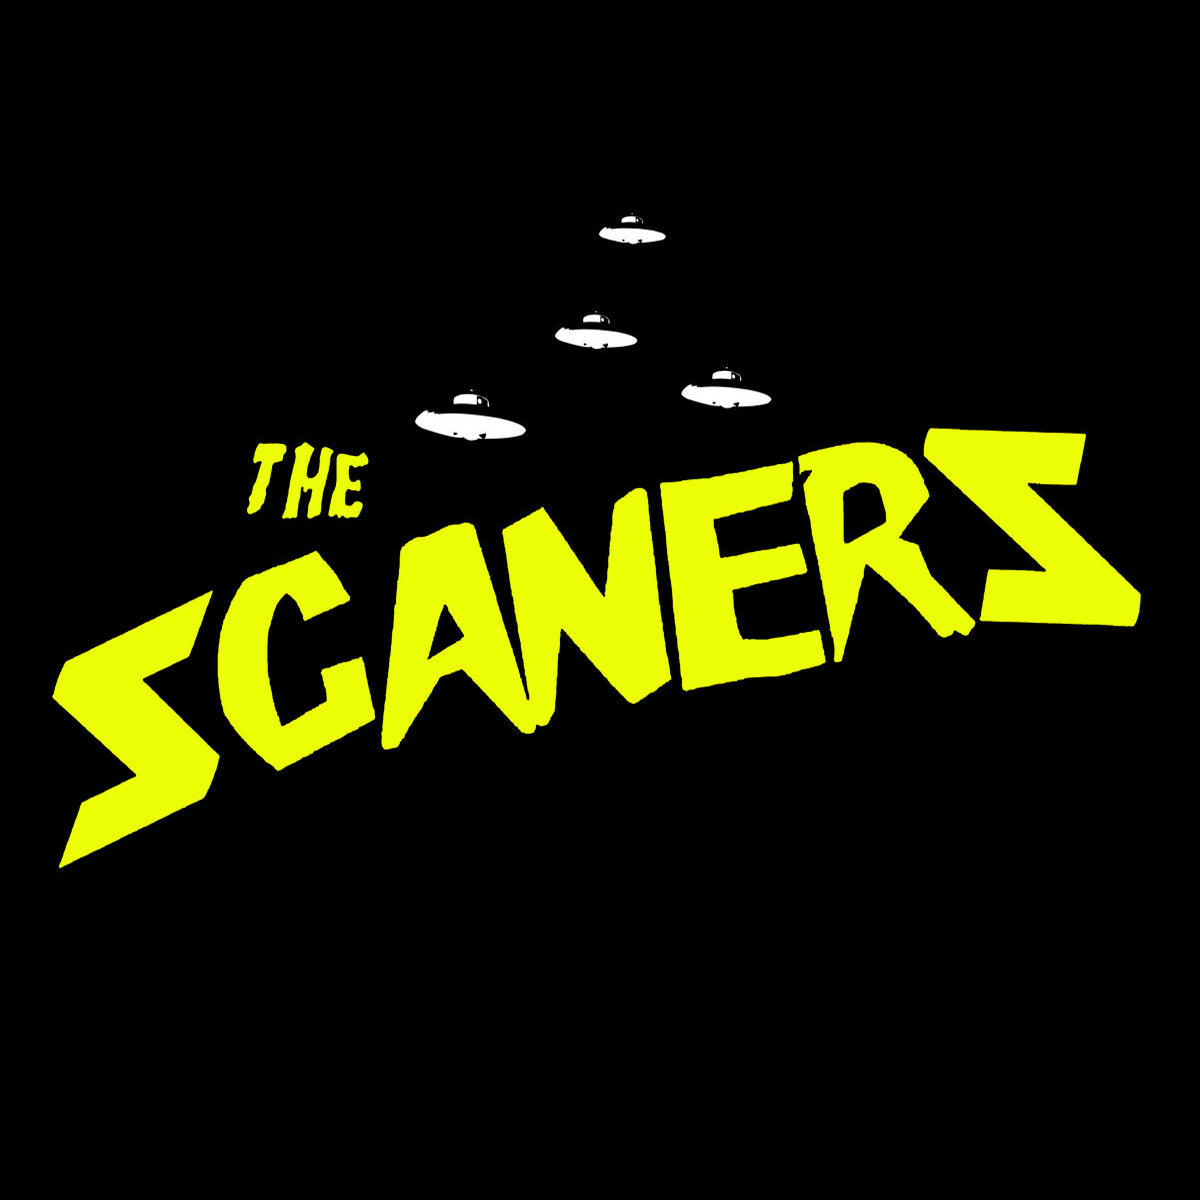 Scaners- S/T CD ~SCREAMERS!